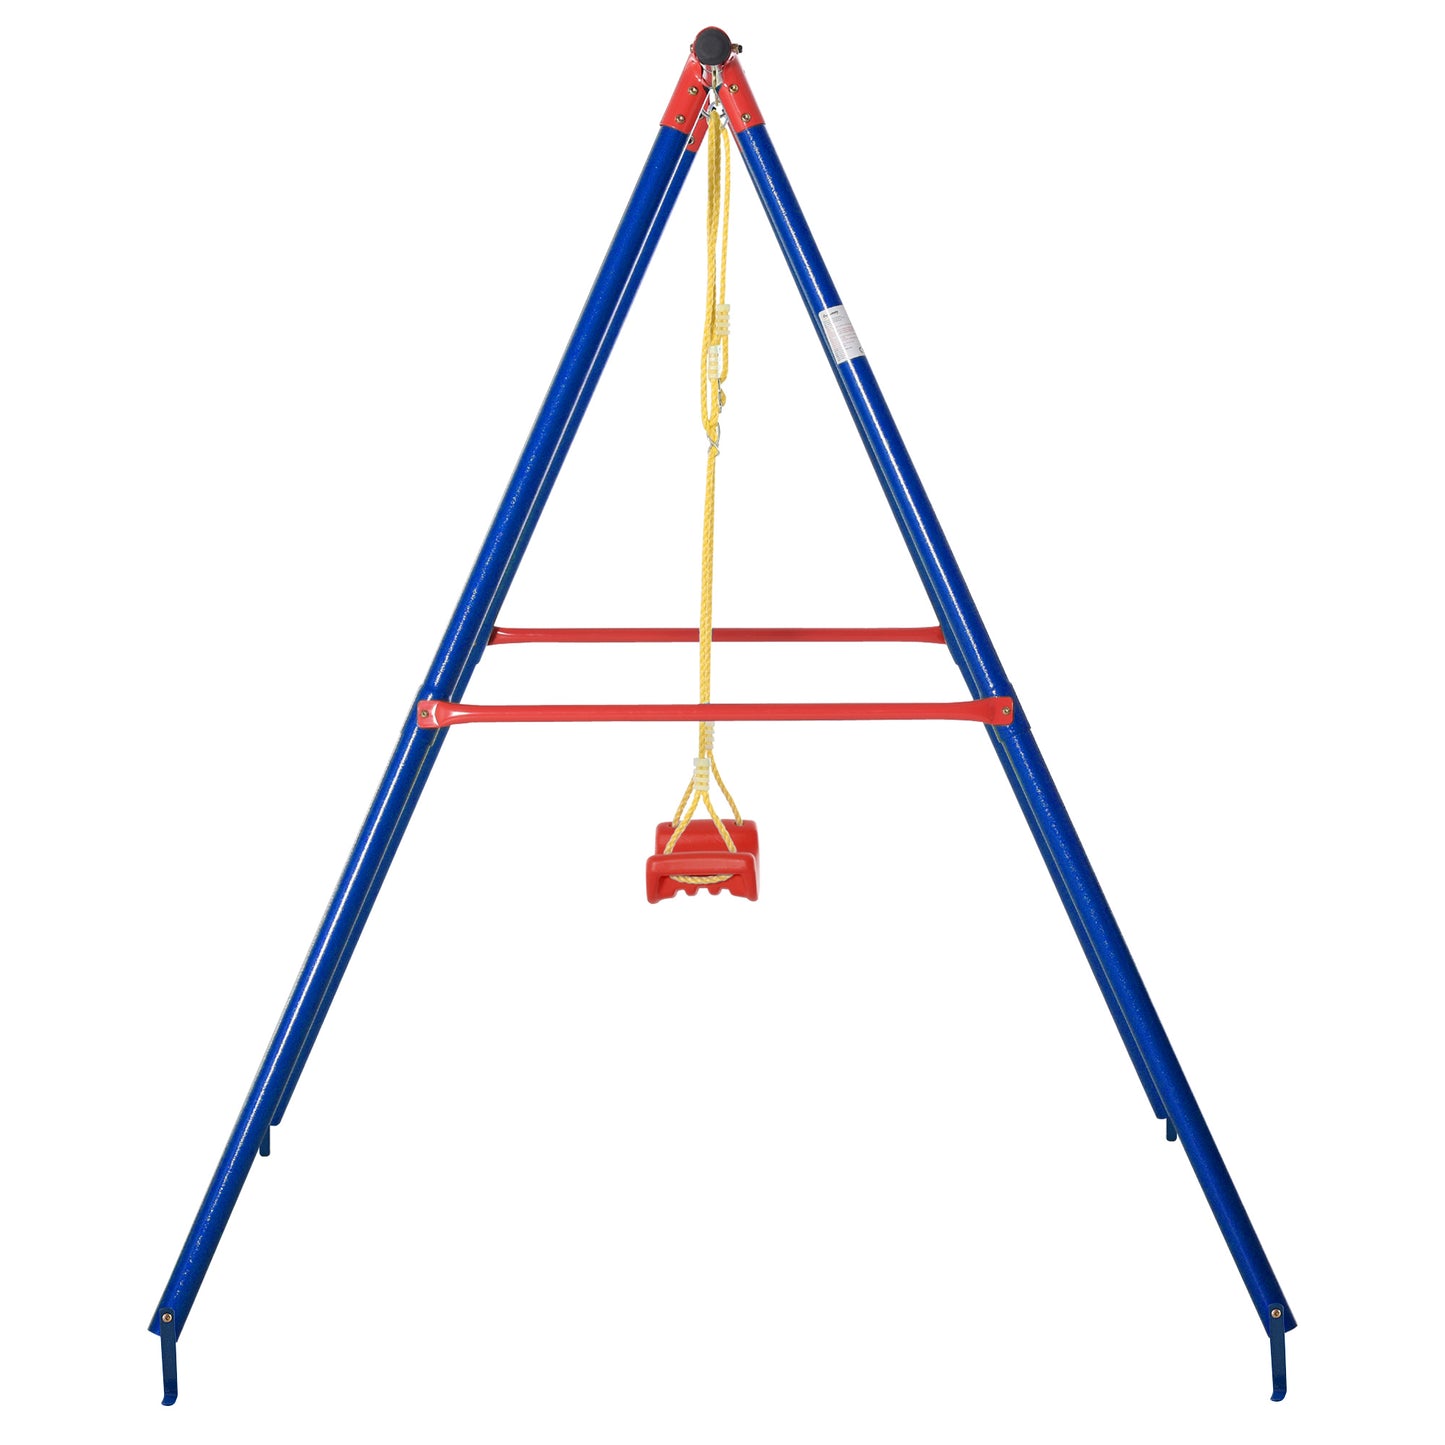 Outsunny Metal Swing Set w/ Adjustable Rope Heavy Duty A-Frame Stand Outdoor Playset